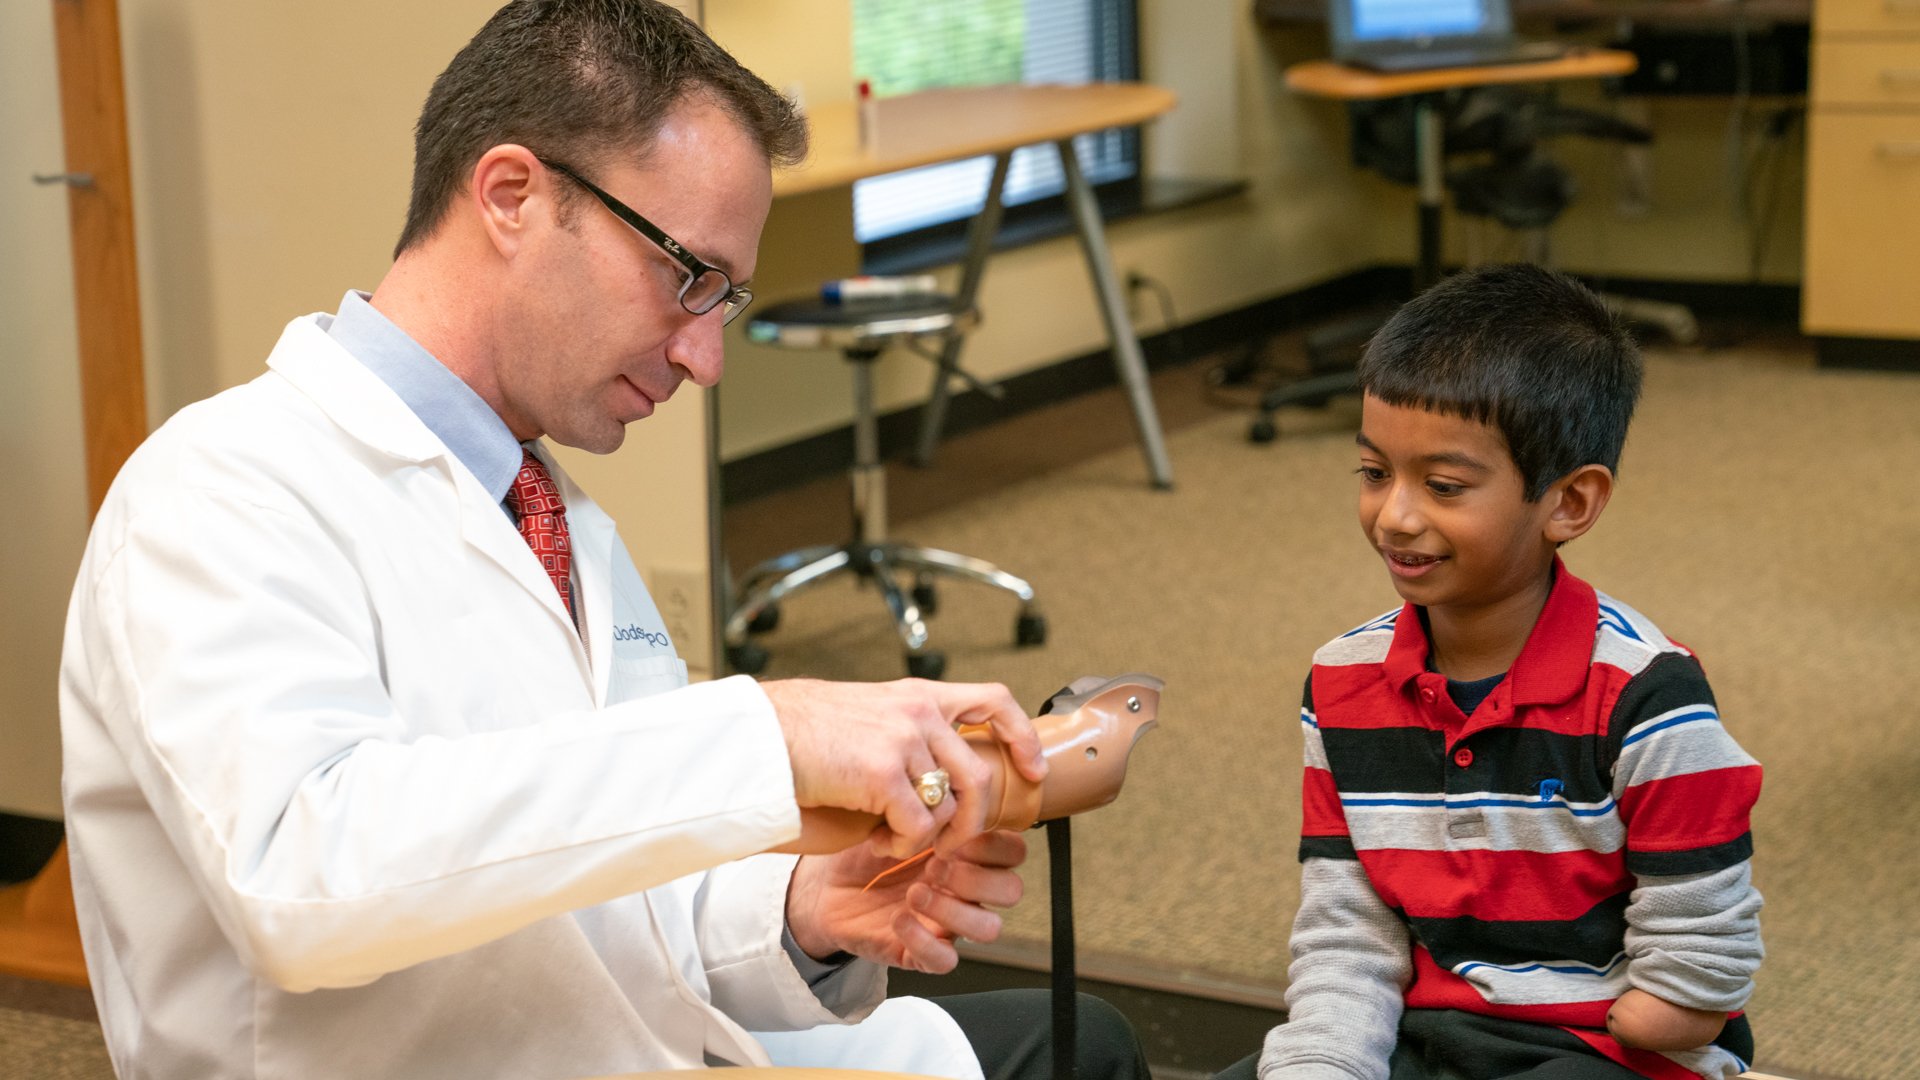 Prosthetist Rob Dodson fitting a pediatric patient